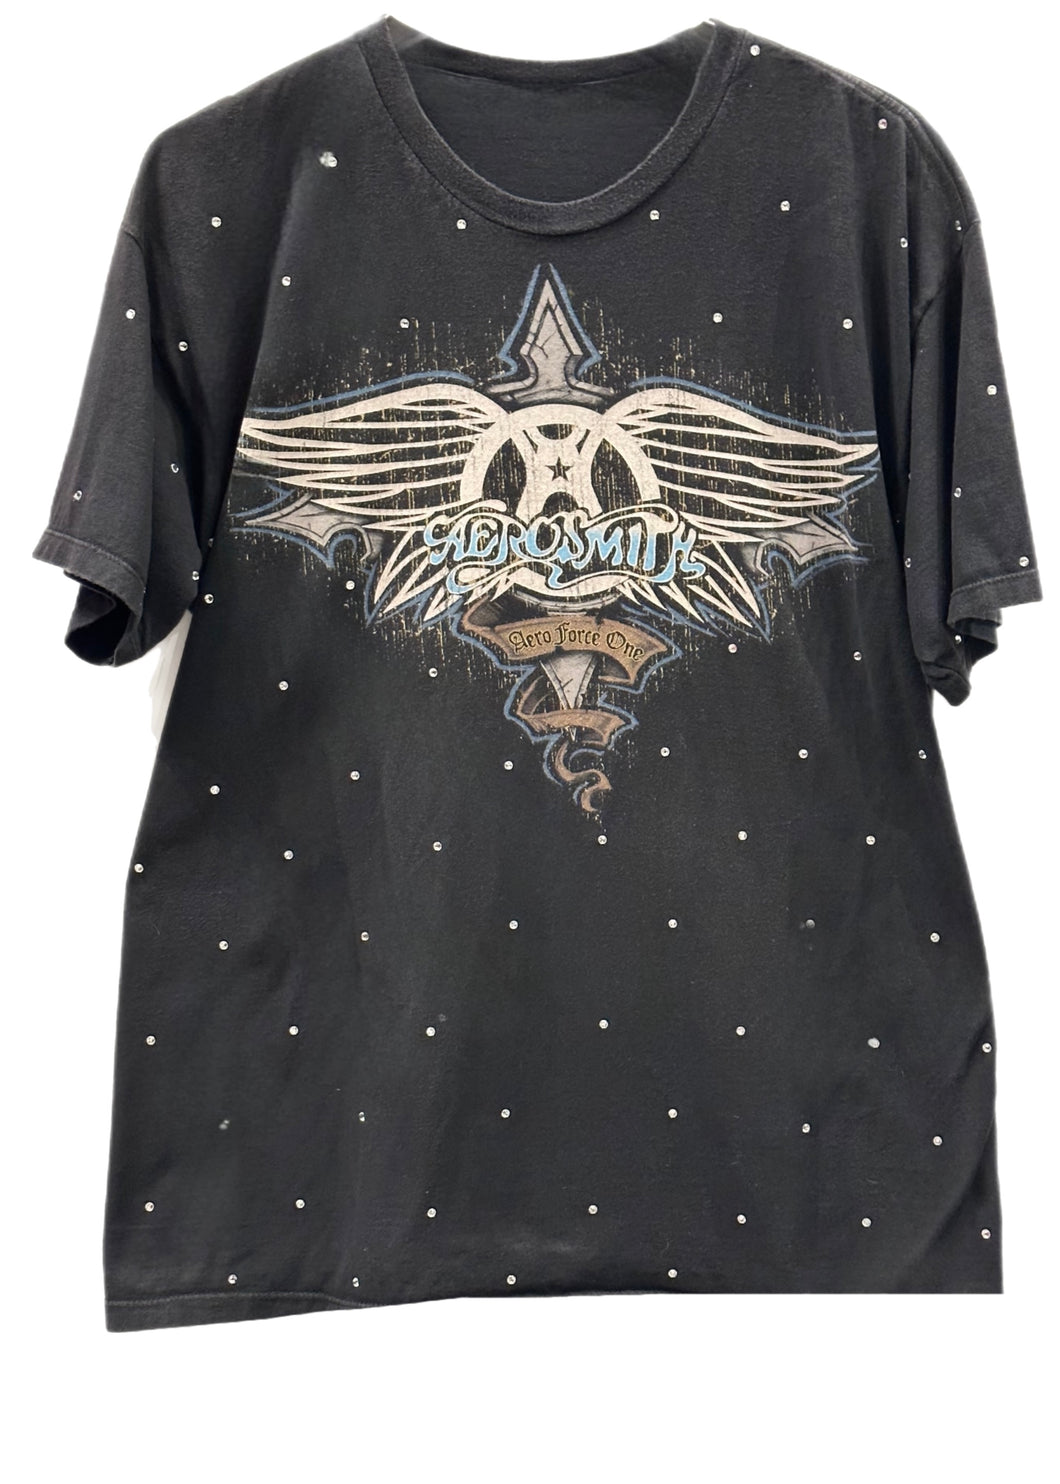 Aerosmith, One of a KIND “Rare Find” Vintage Rock Band Tee with Overall Crystal Design